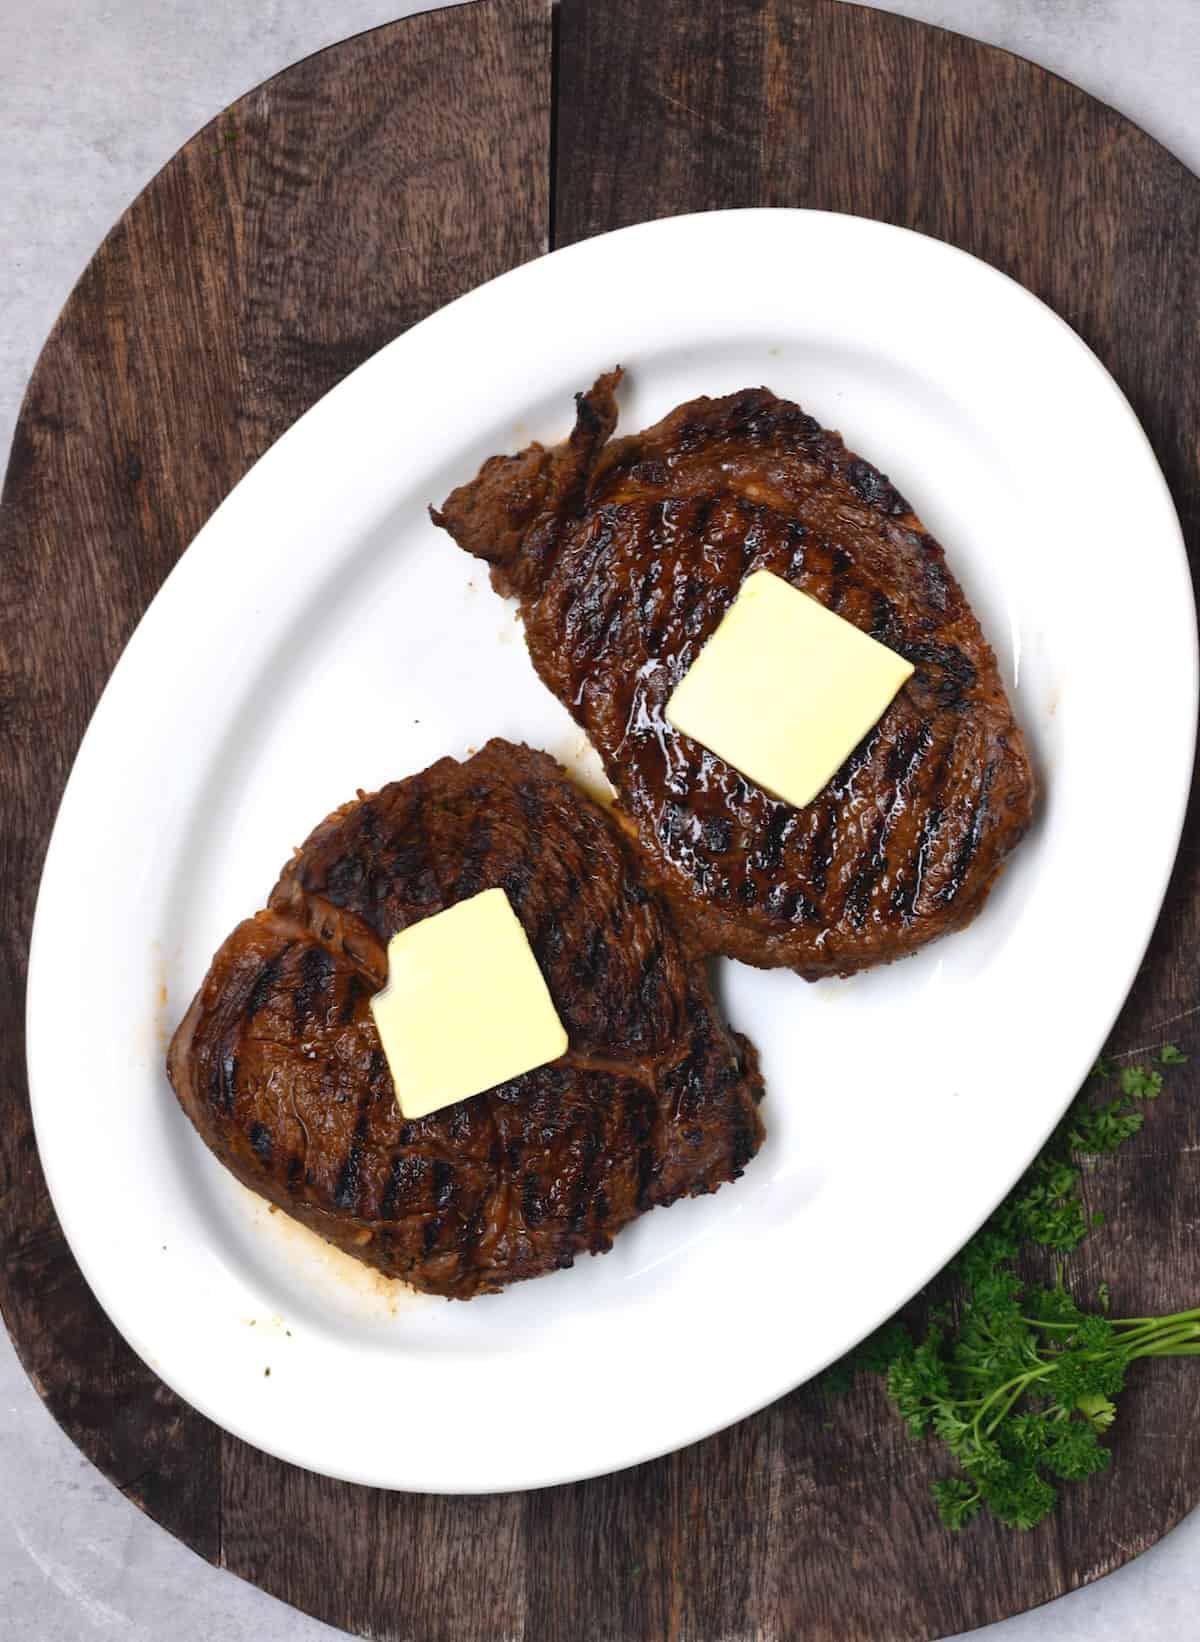 Cooked steaks topped with butter